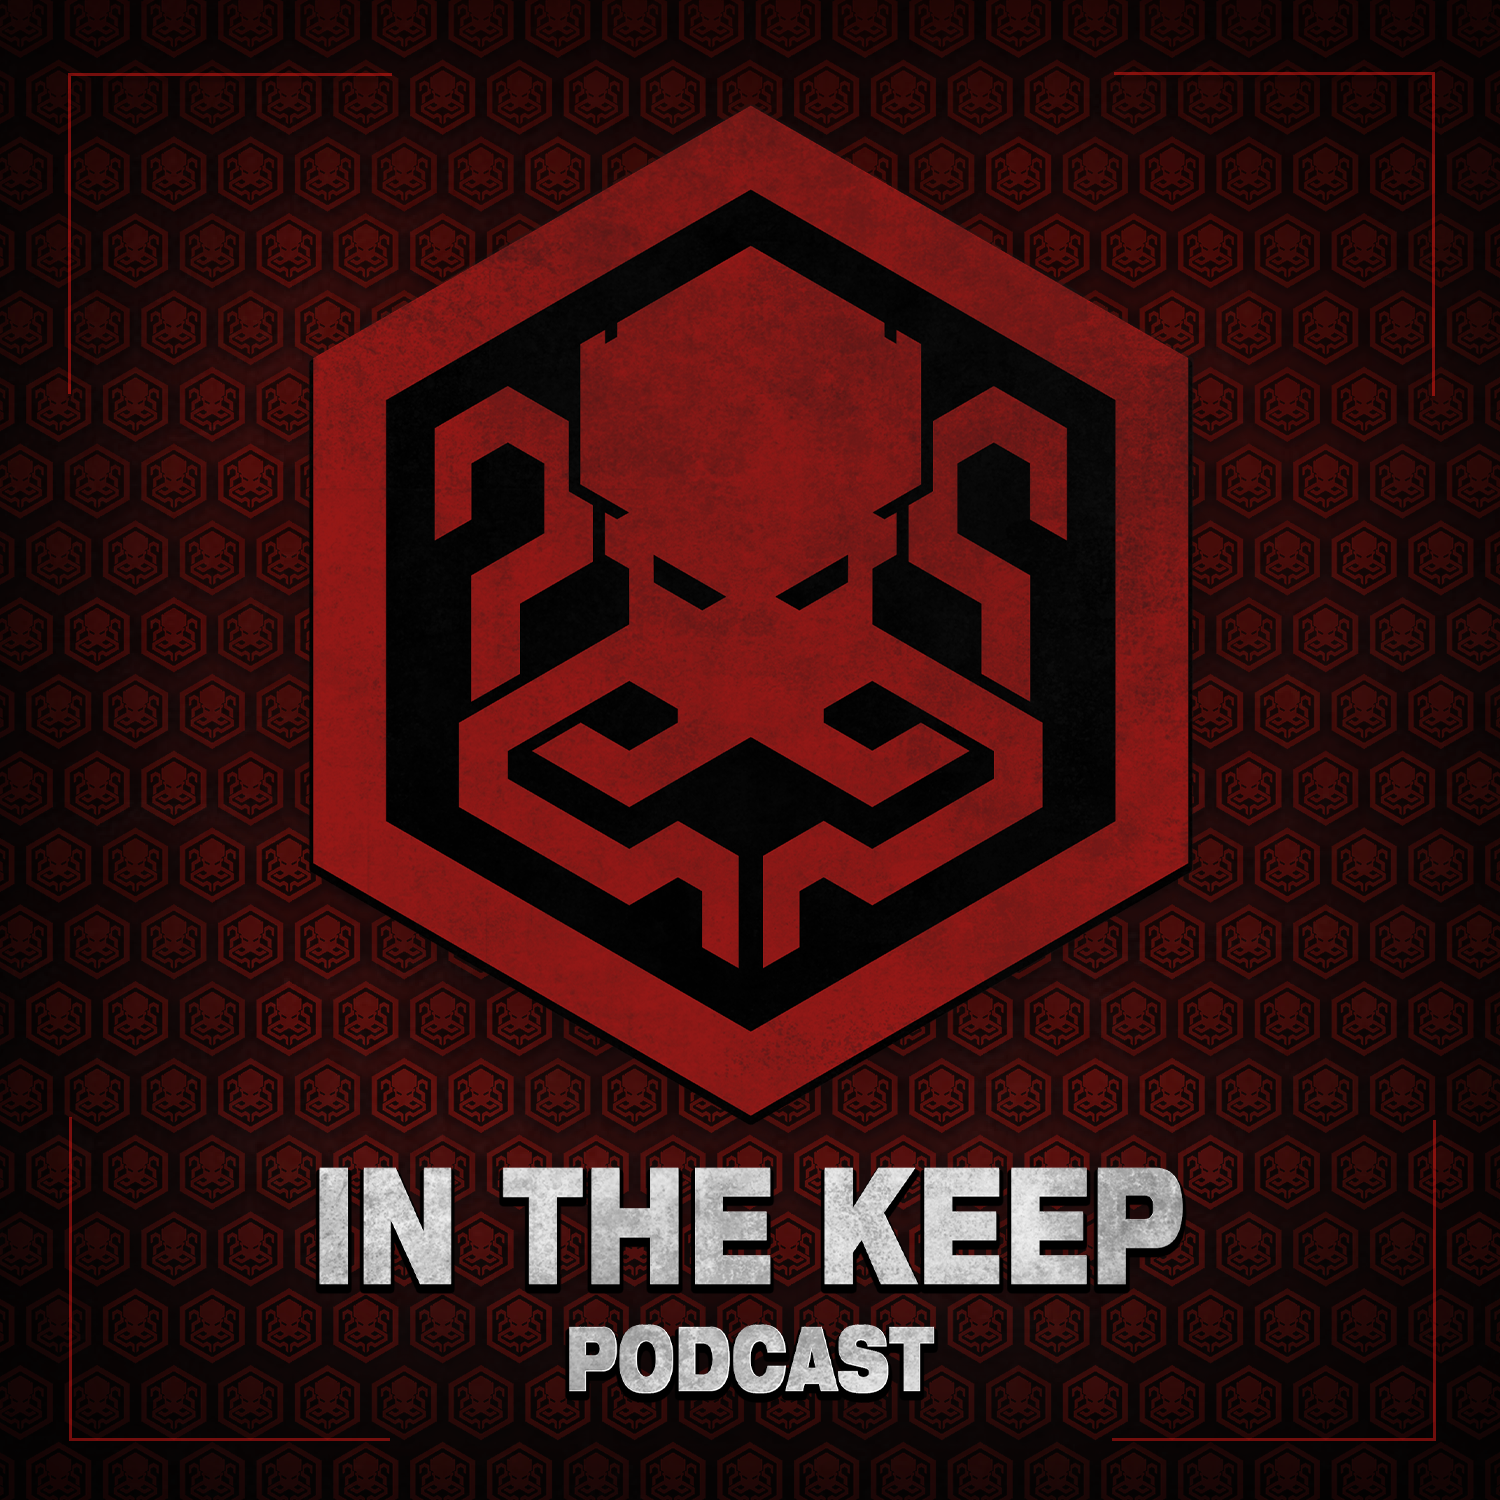 In The Keep Podcast – #83 Jake The Voice (E1M1 Magazine)